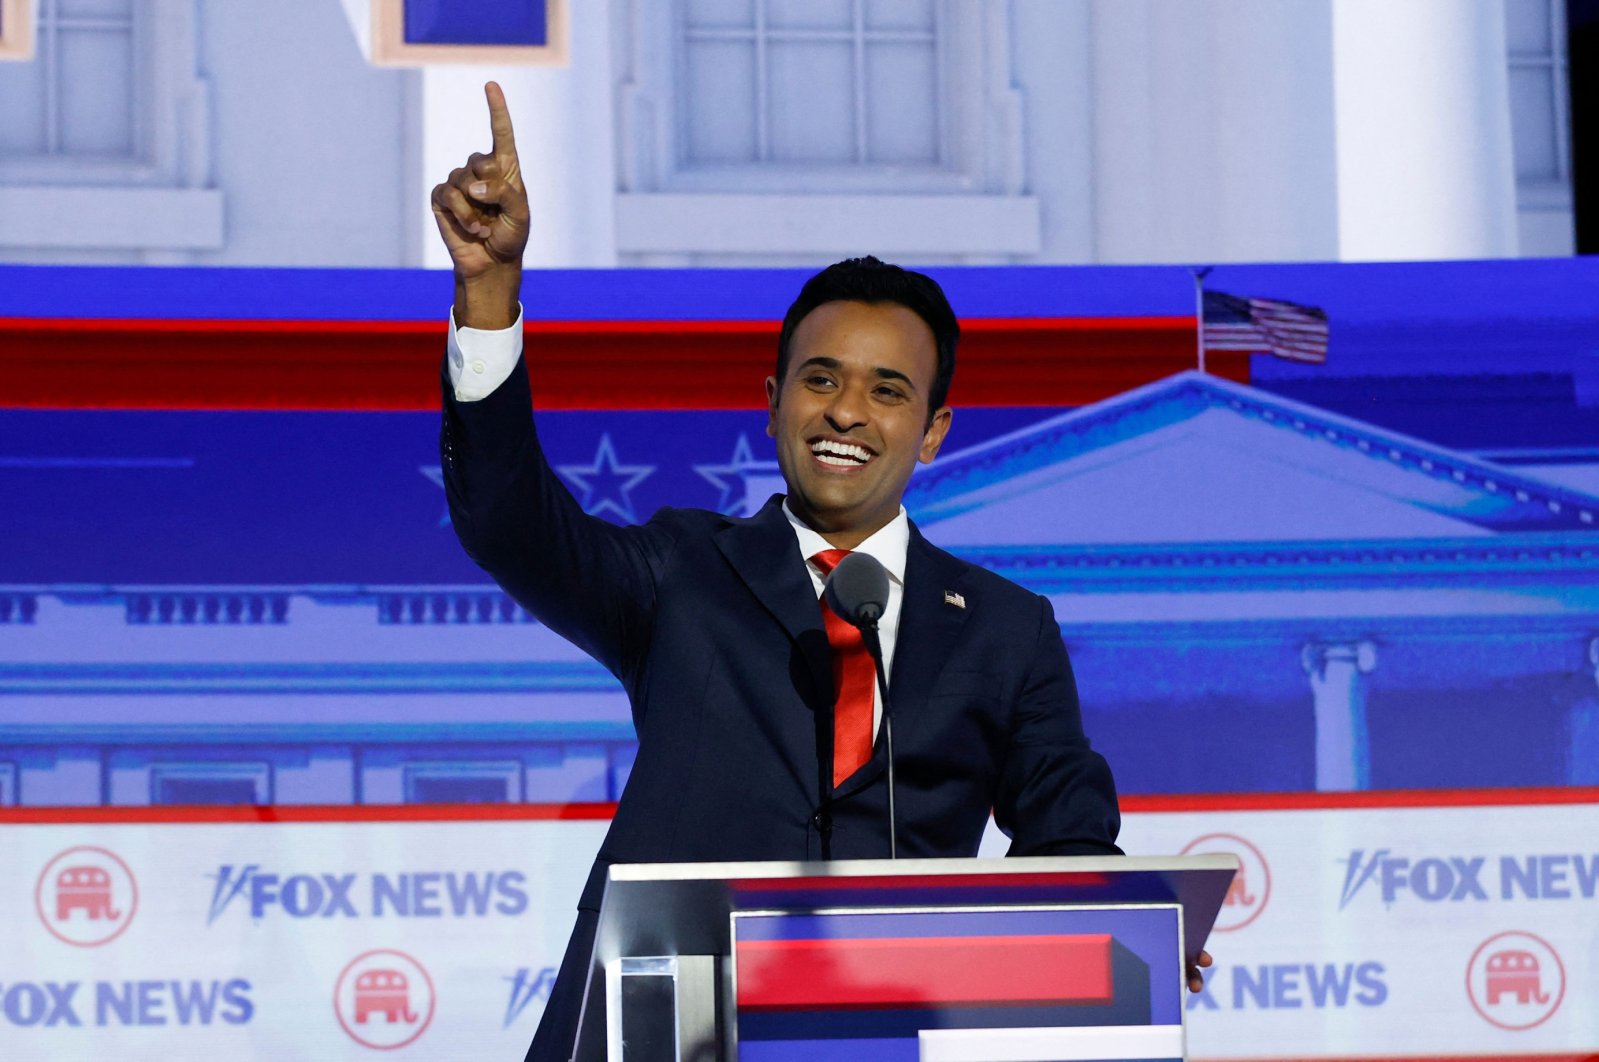 Entrepreneur and author Vivek Ramaswamy waves as he arrives to take part in the first Republican Presidential primary debate at the Fiserv Forum in Milwaukee, Wisconsin, U.S., Aug. 23, 2023. (AFP Photo)